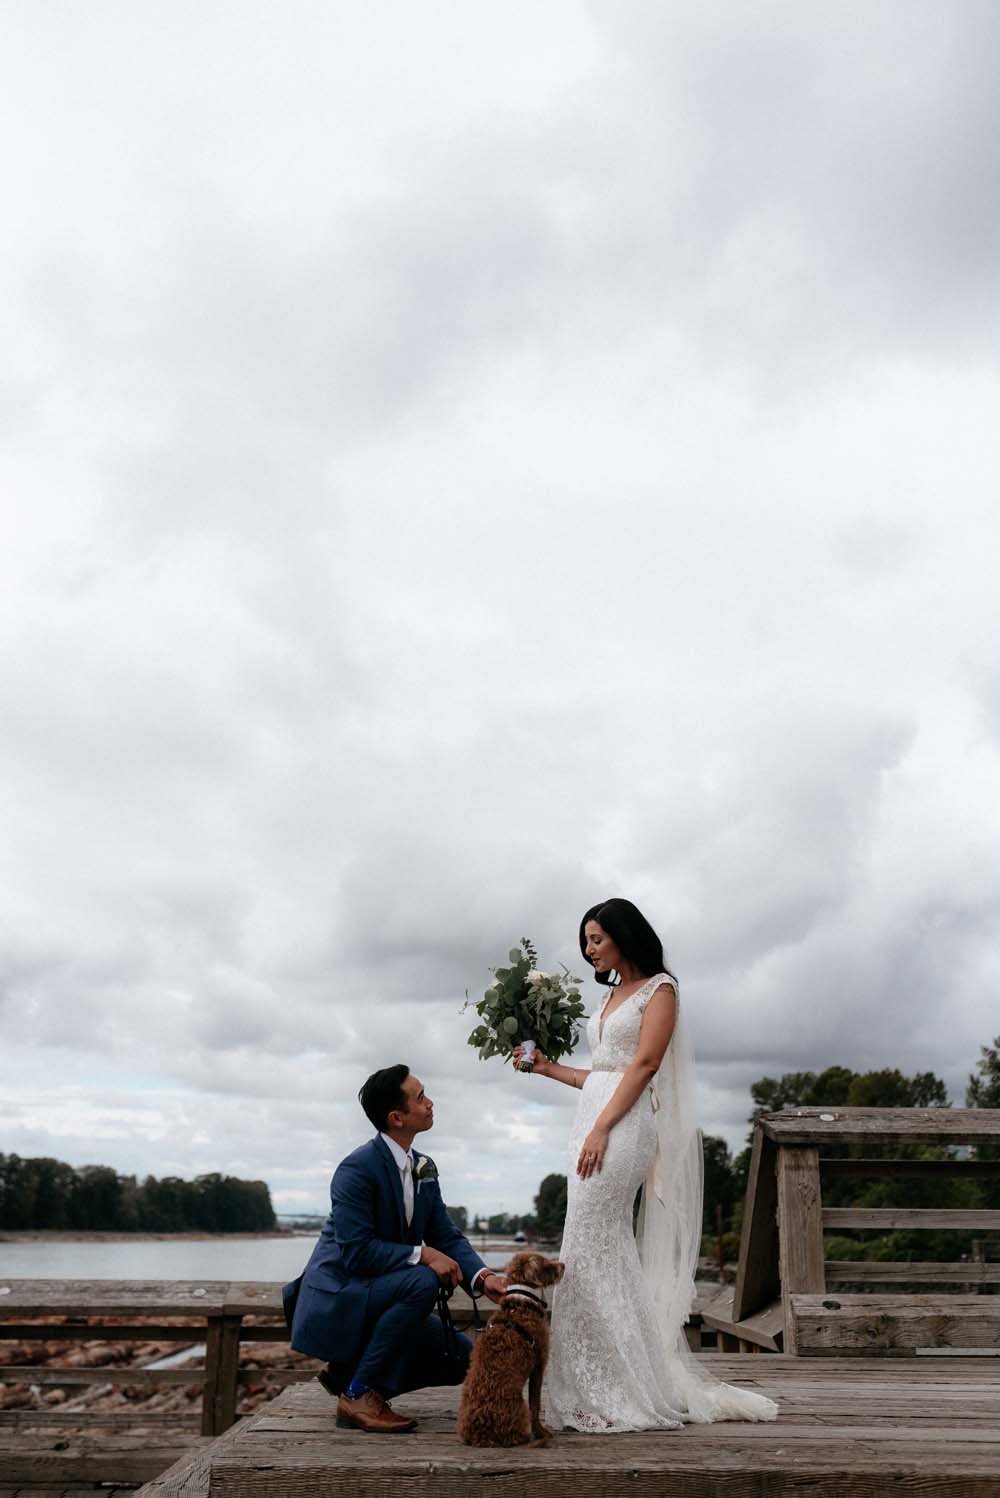 A Multicultural Wedding At The UBC Botanical Garden in Vancouver - bride and groom